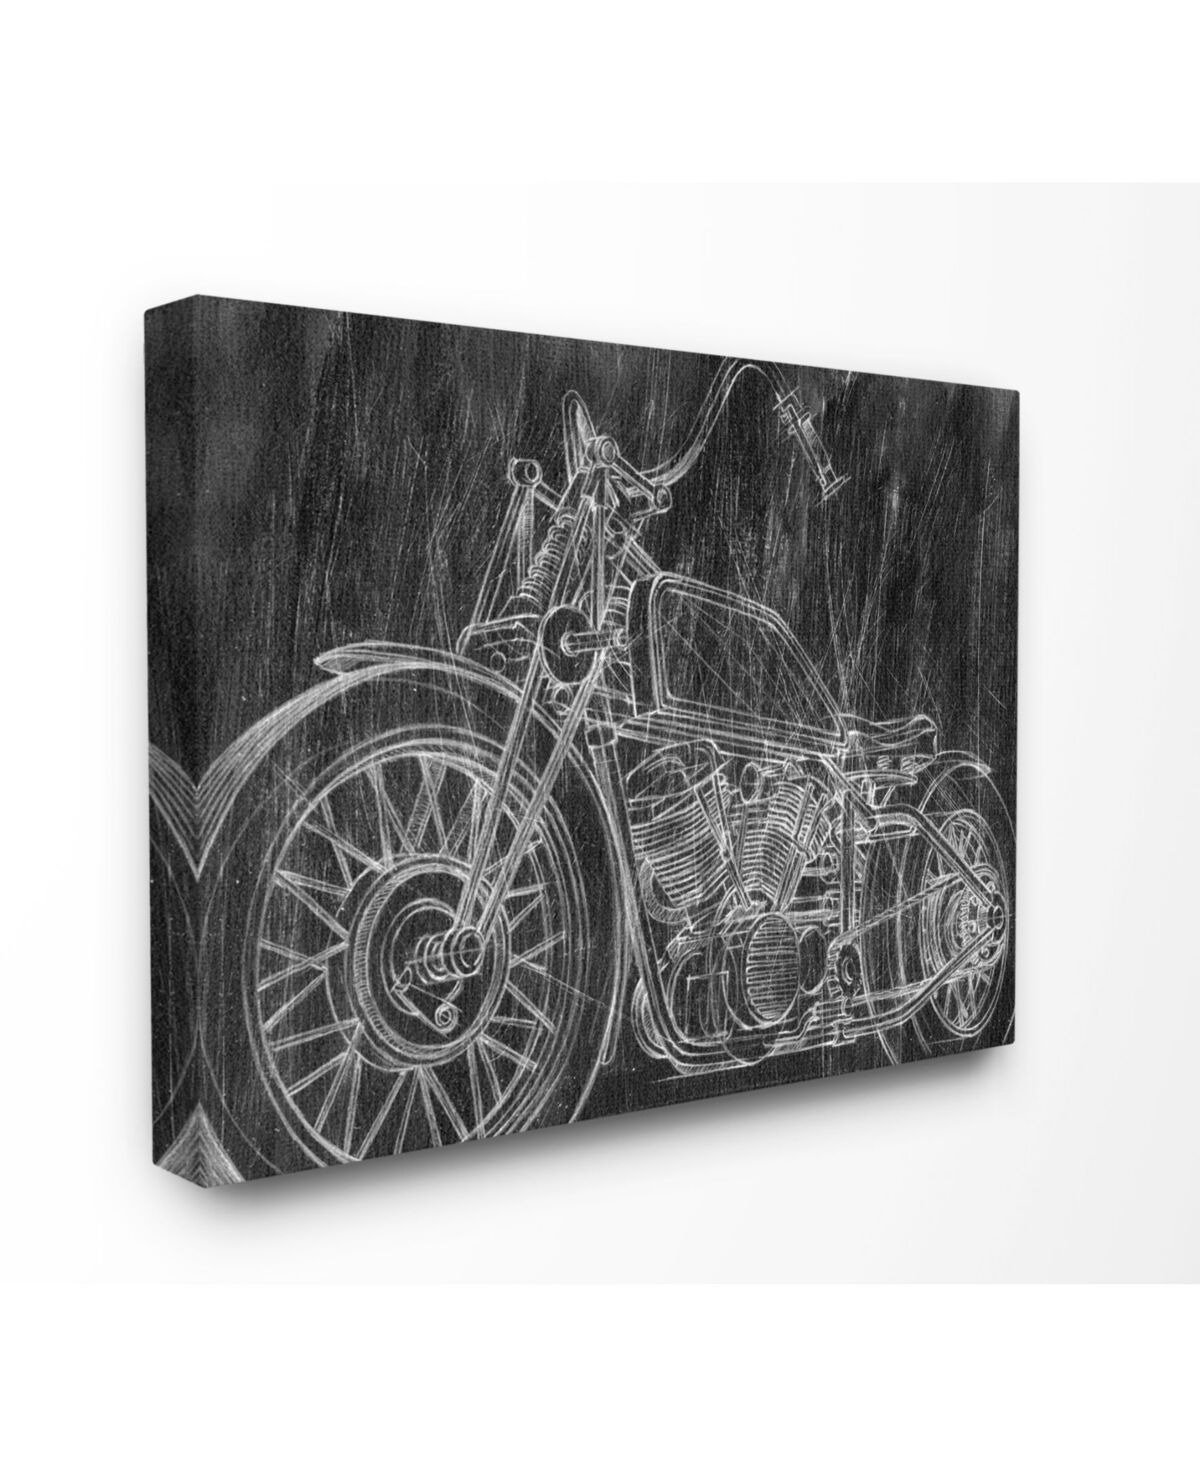 Stupell Industries Monotone Black and White Motorcycle Sketch Canvas Wall Art, 30